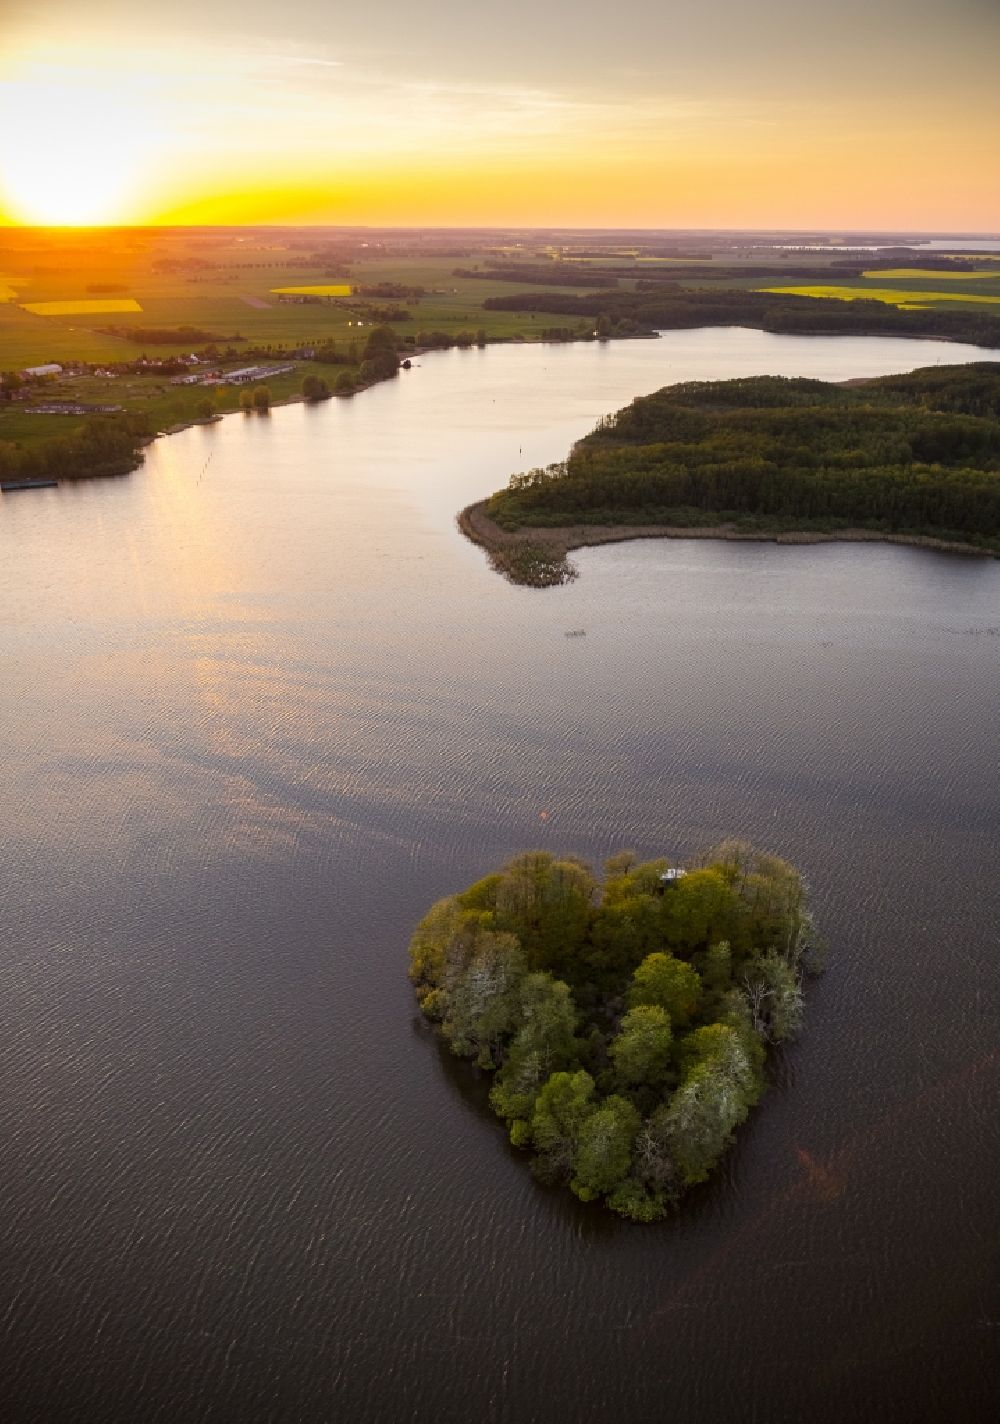 Vipperow from the bird's eye view: Heart-shaped island in the lake at Vipperow in Mecklenburg - Western Pomerania